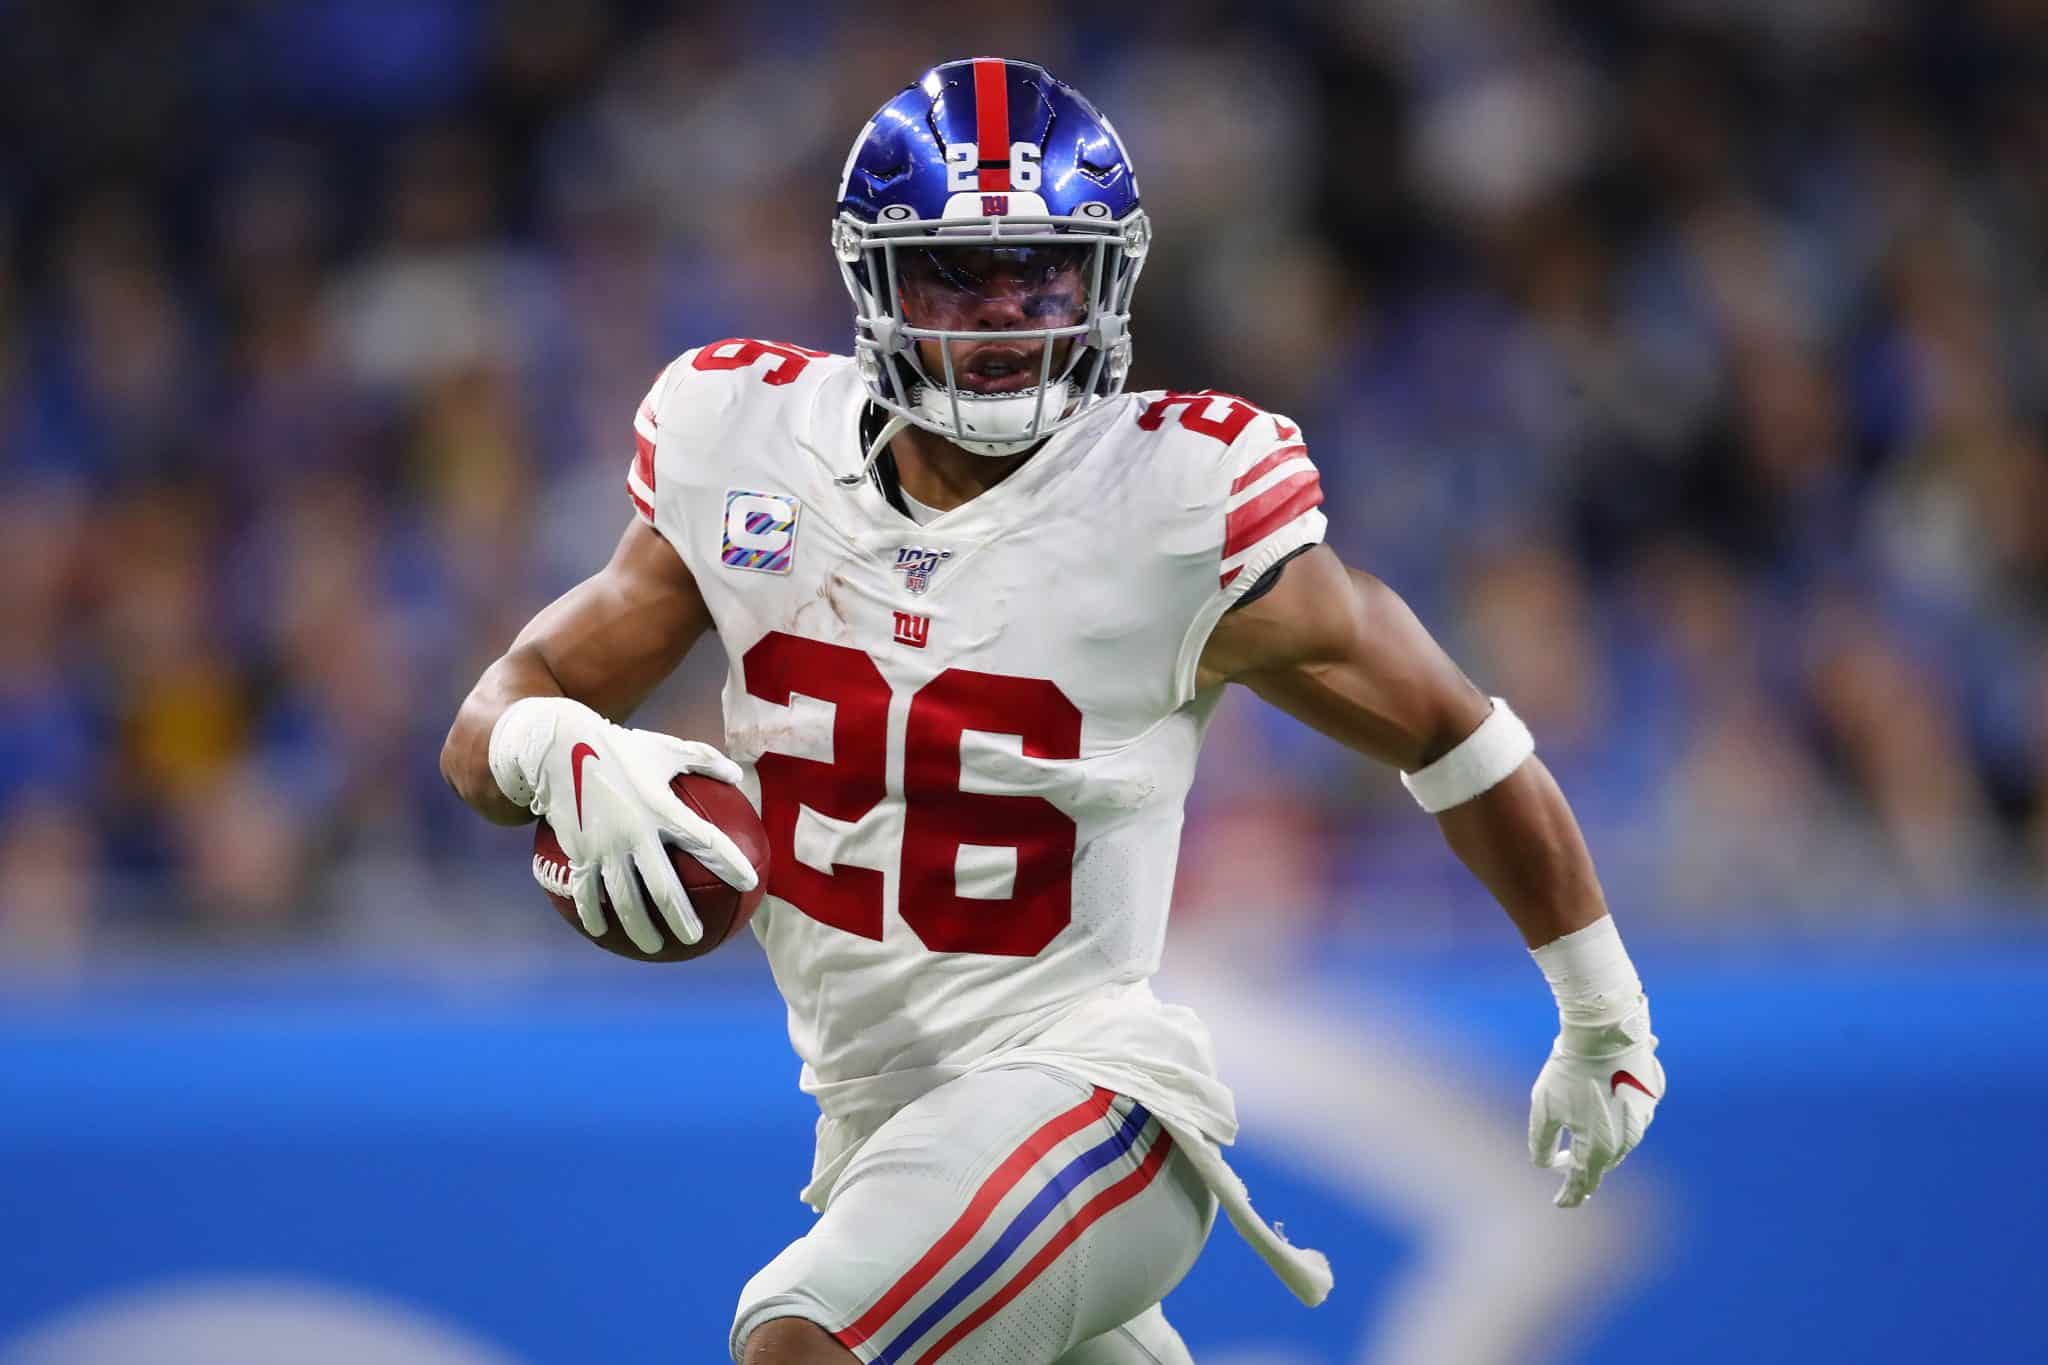 DETROIT, MICHIGAN - OCTOBER 27: Saquon Barkley #26 of the New York Giants looks for running room against the Detroit Lions in the first half at Ford Field on October 27, 2019 in Detroit, Michigan.